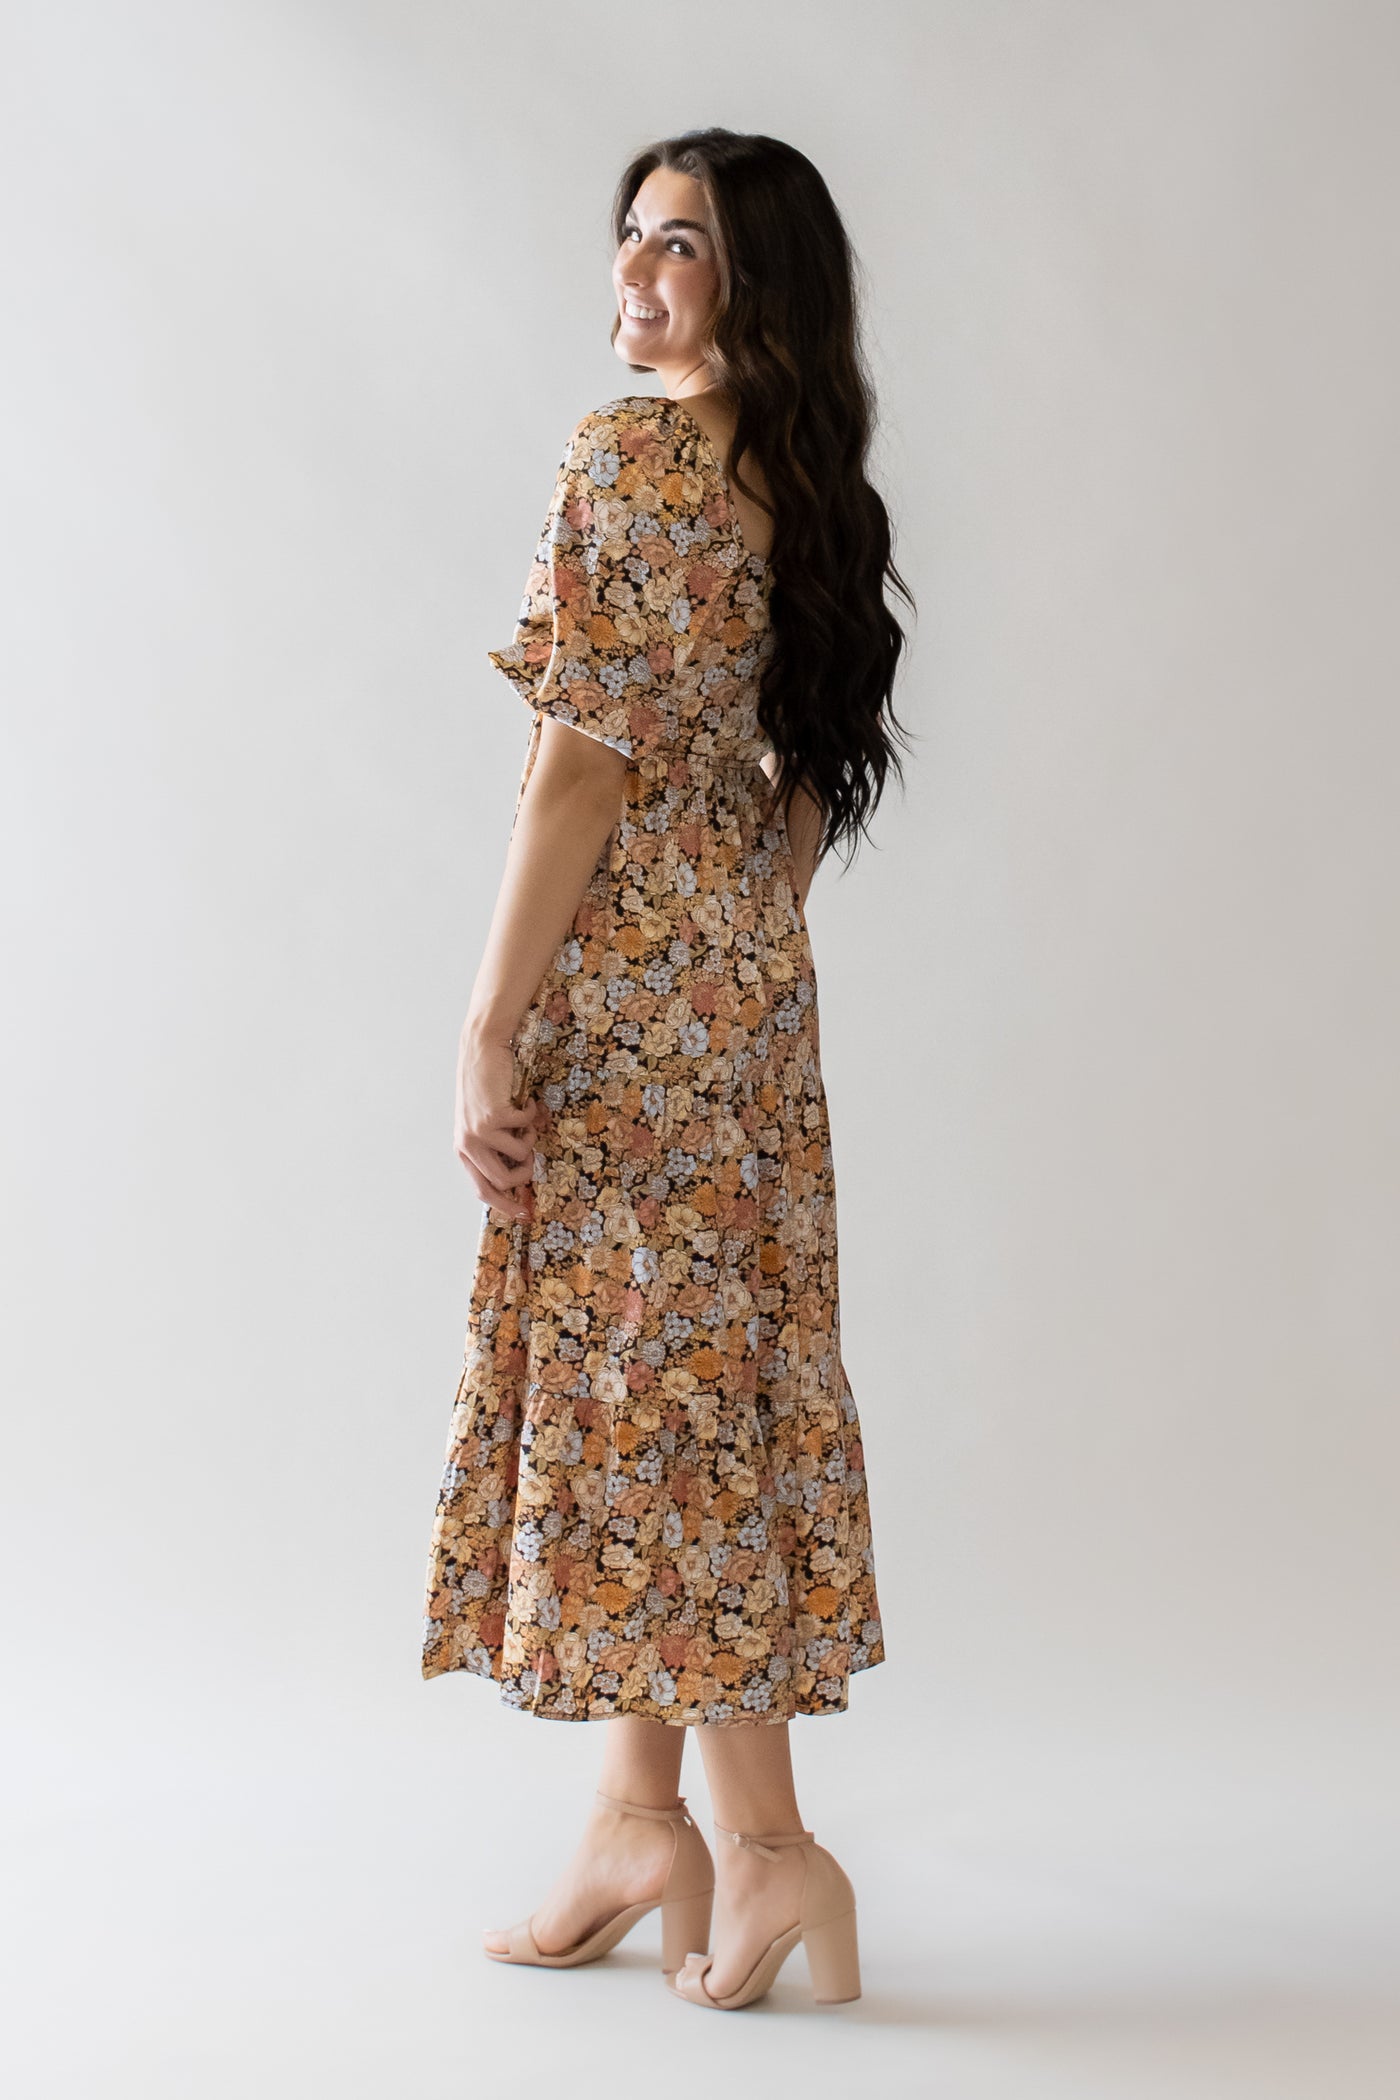 This is the back of a modest dress with orange and yellow details.